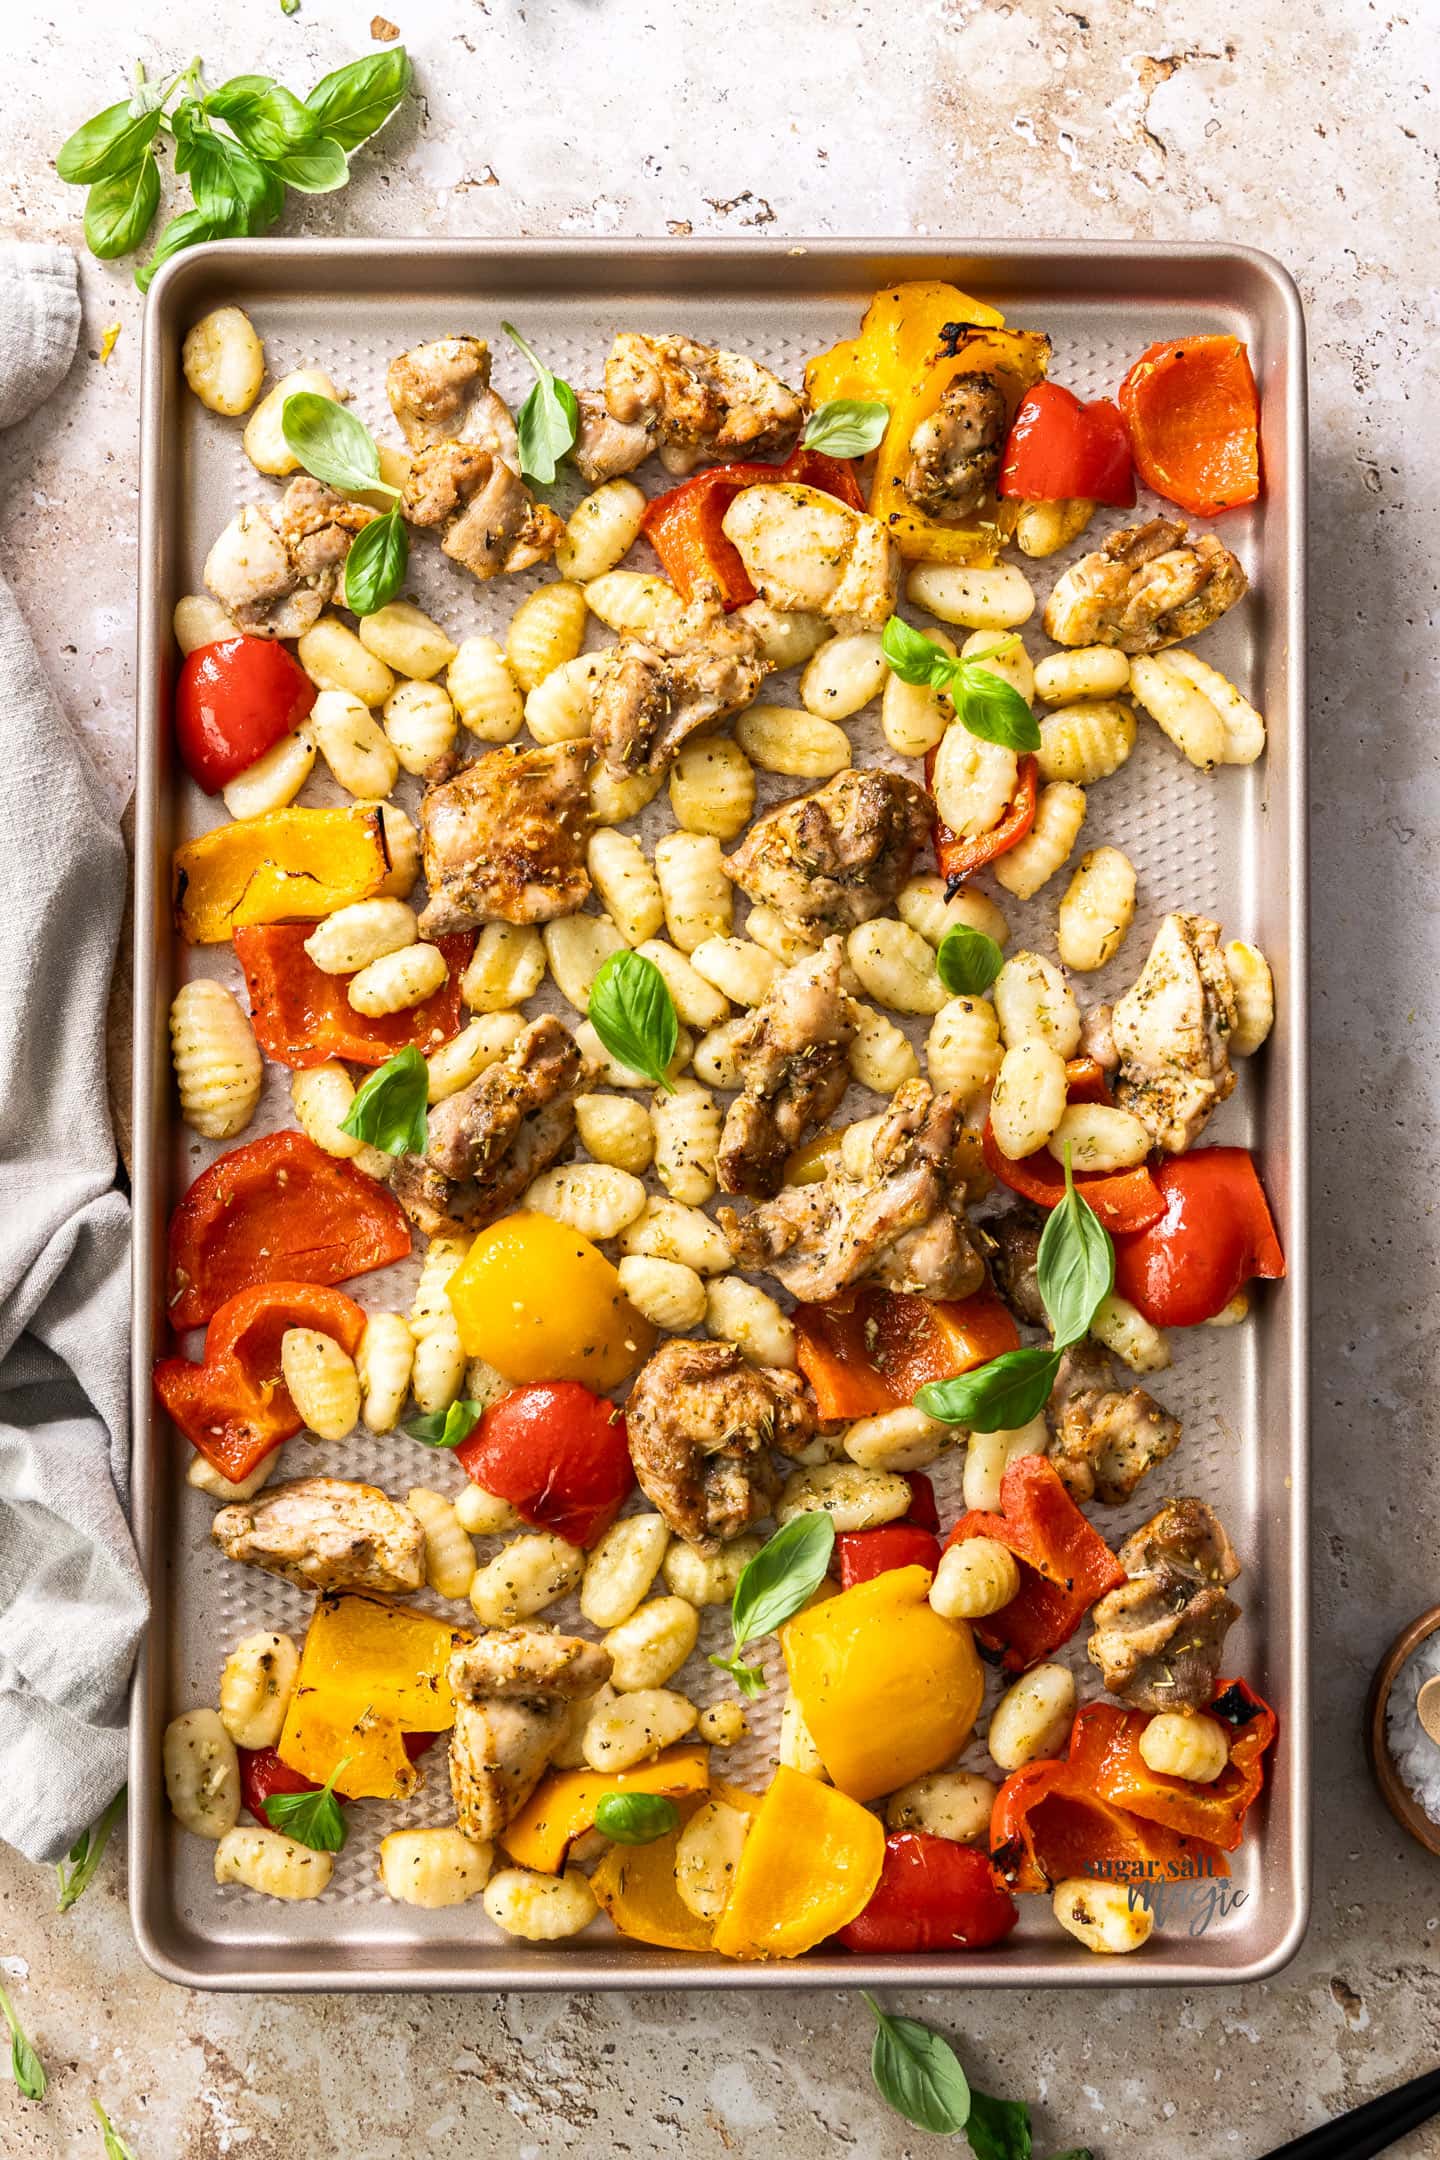 Chicken, peppers and gnocchi on a baking tray.